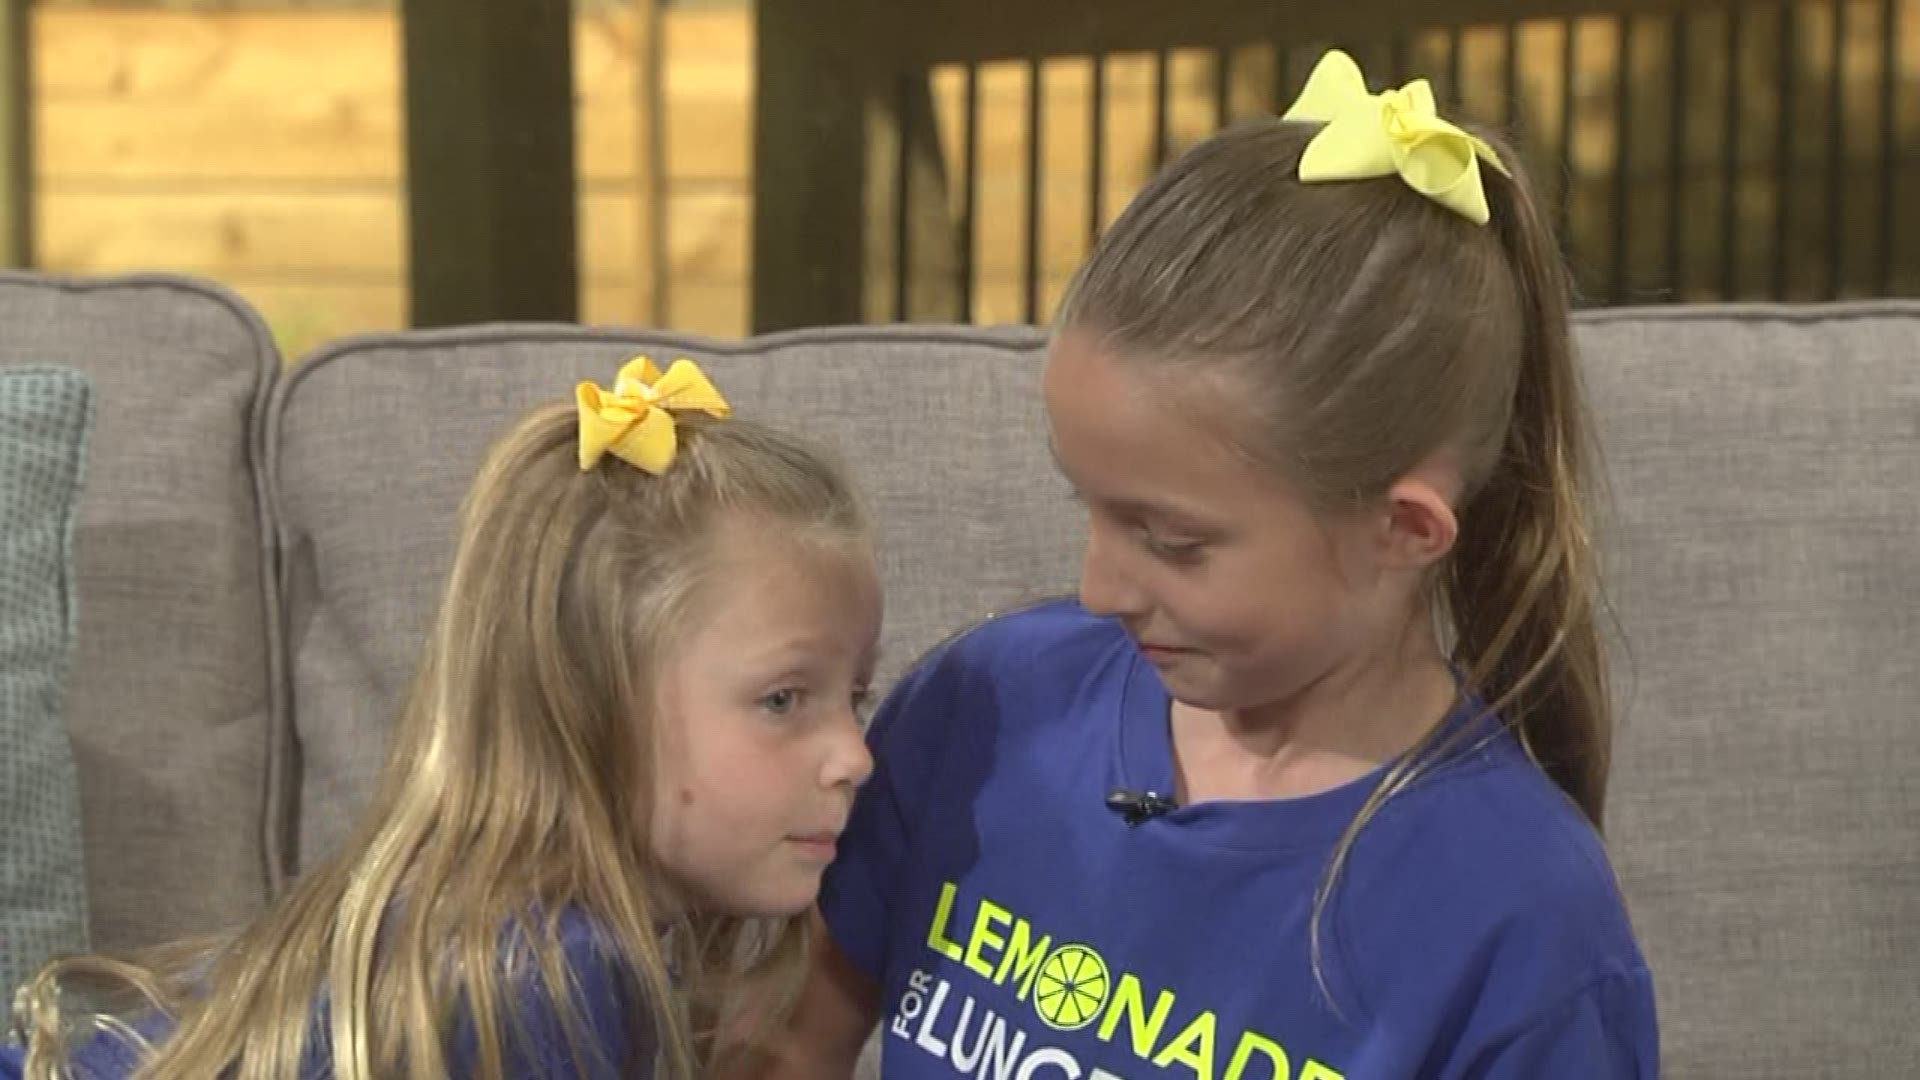 A moment of sisters fussing about their lemonade stand to raise money for lung cancer research